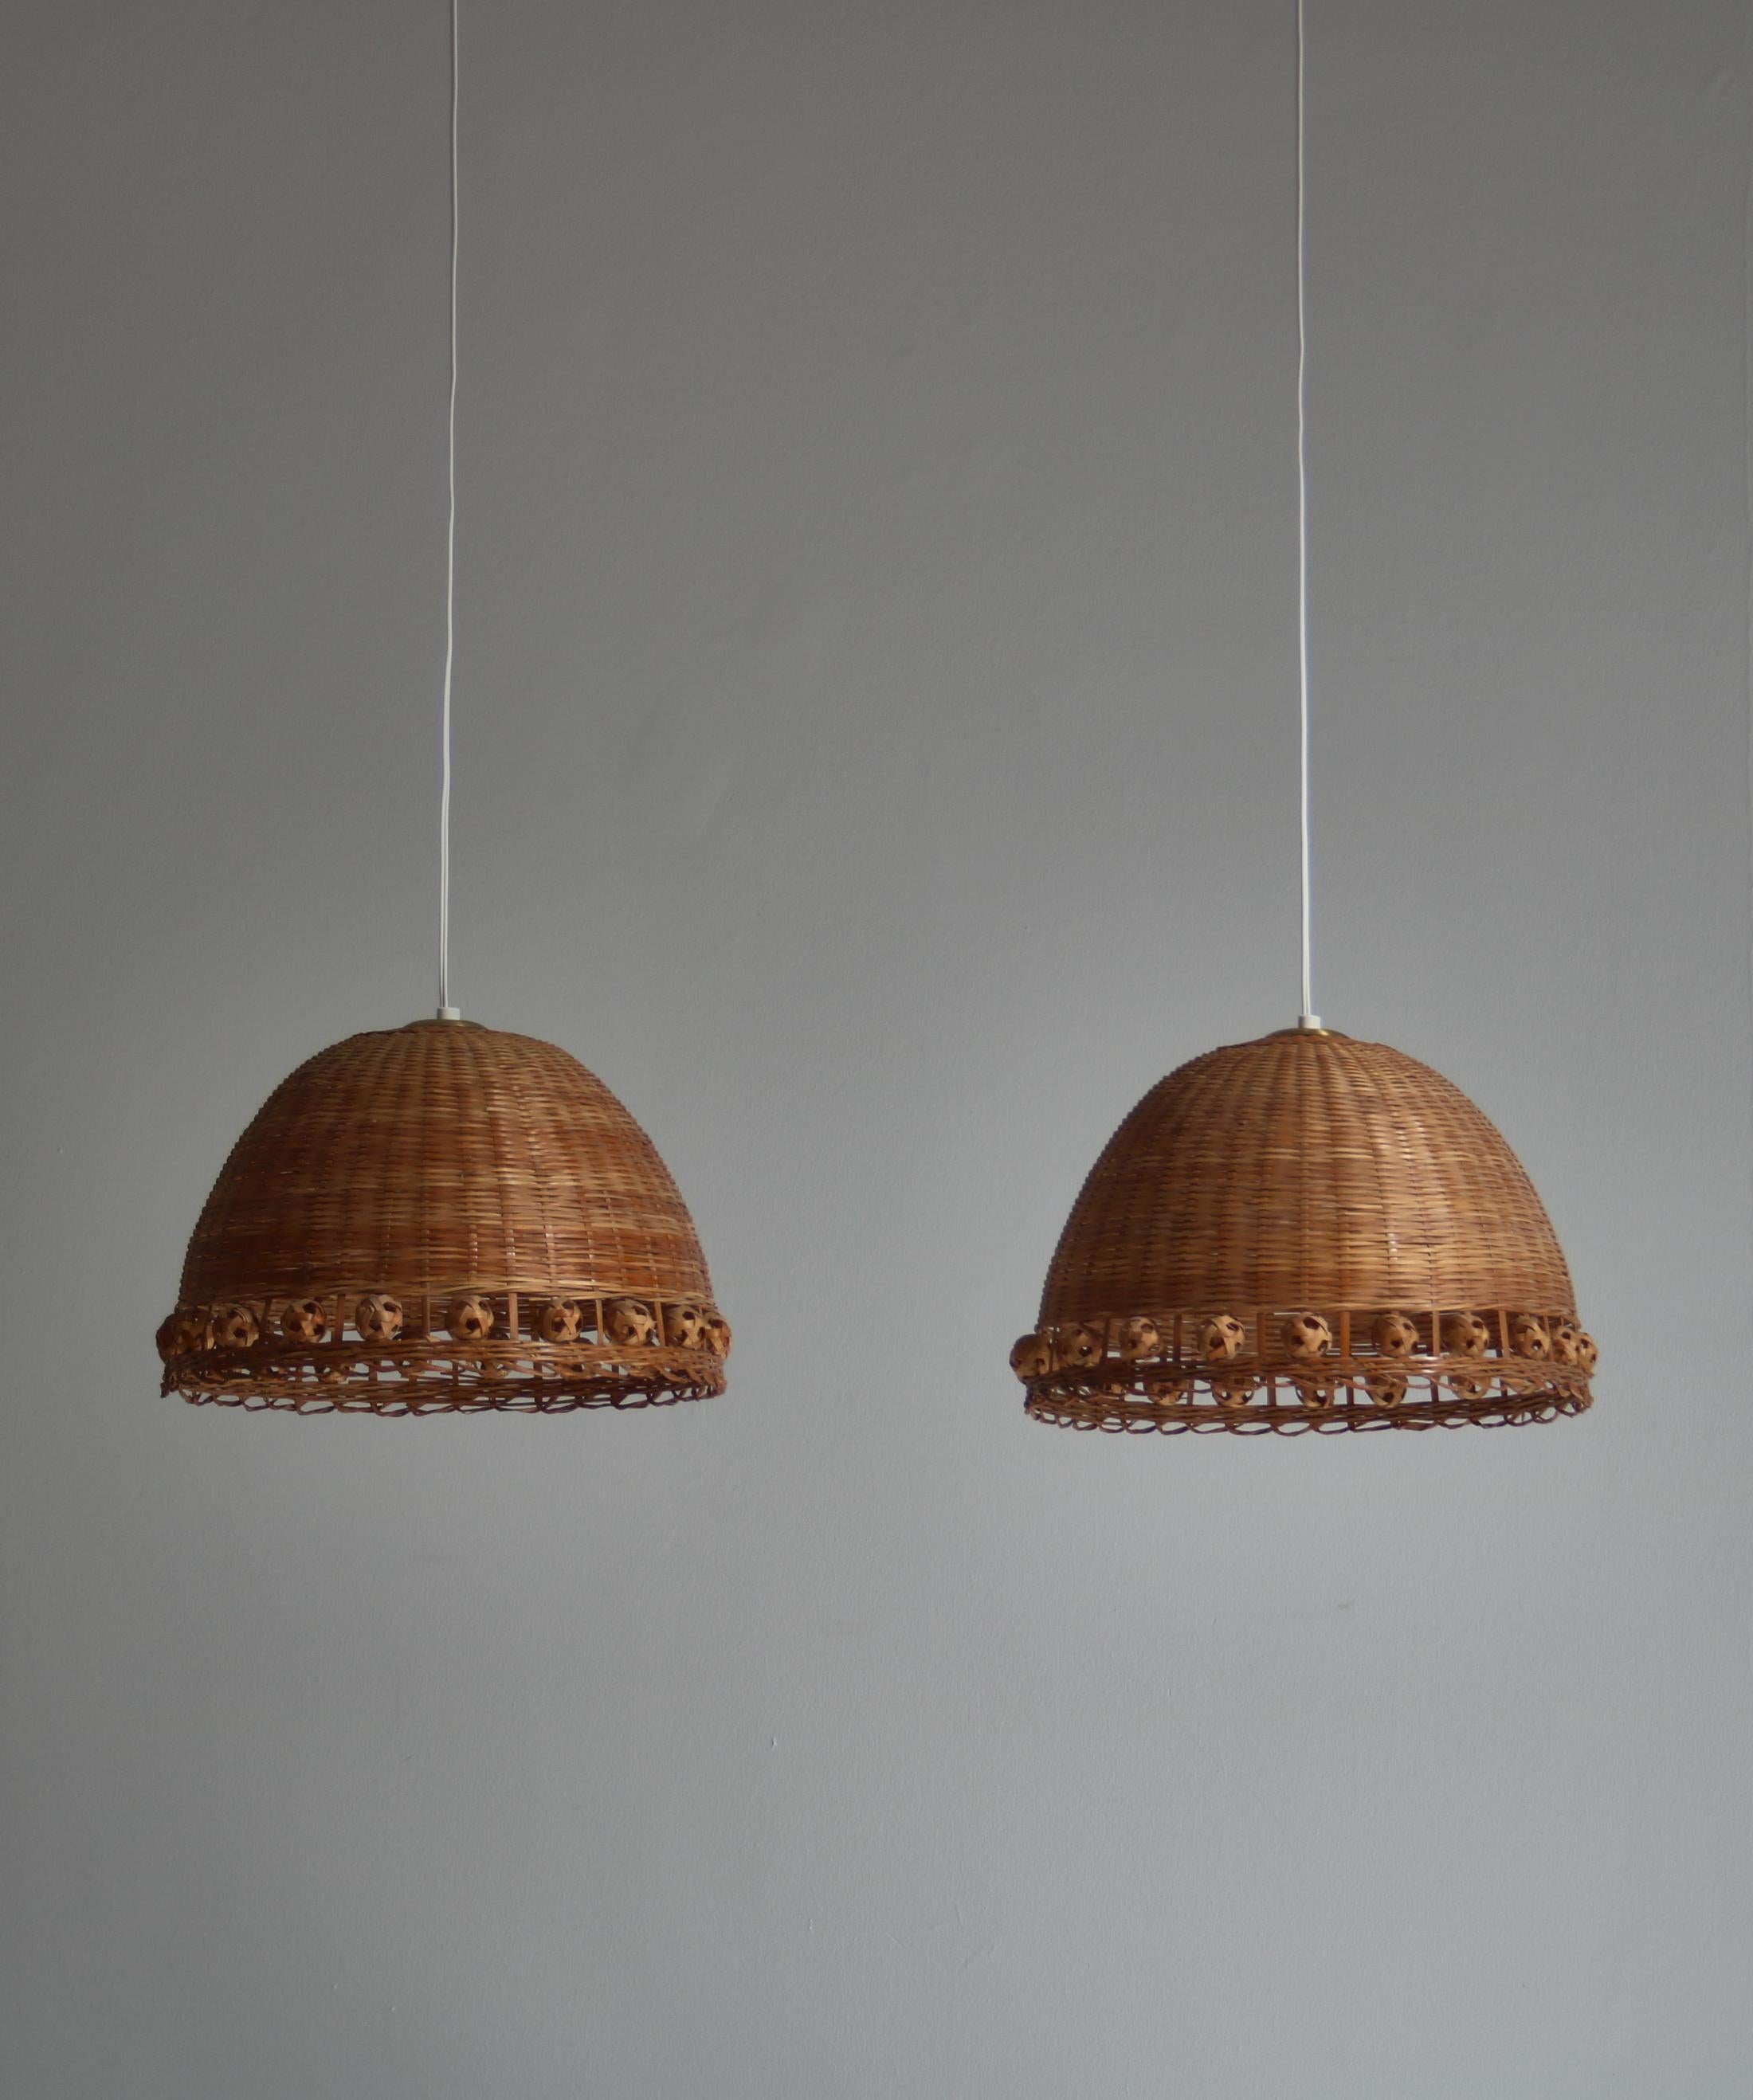 Wonderful set of vintage handmade wicker pendants made in the 1970s Denmark. The elegant and simple design and the woven cane creates a warm and very pleasant light.